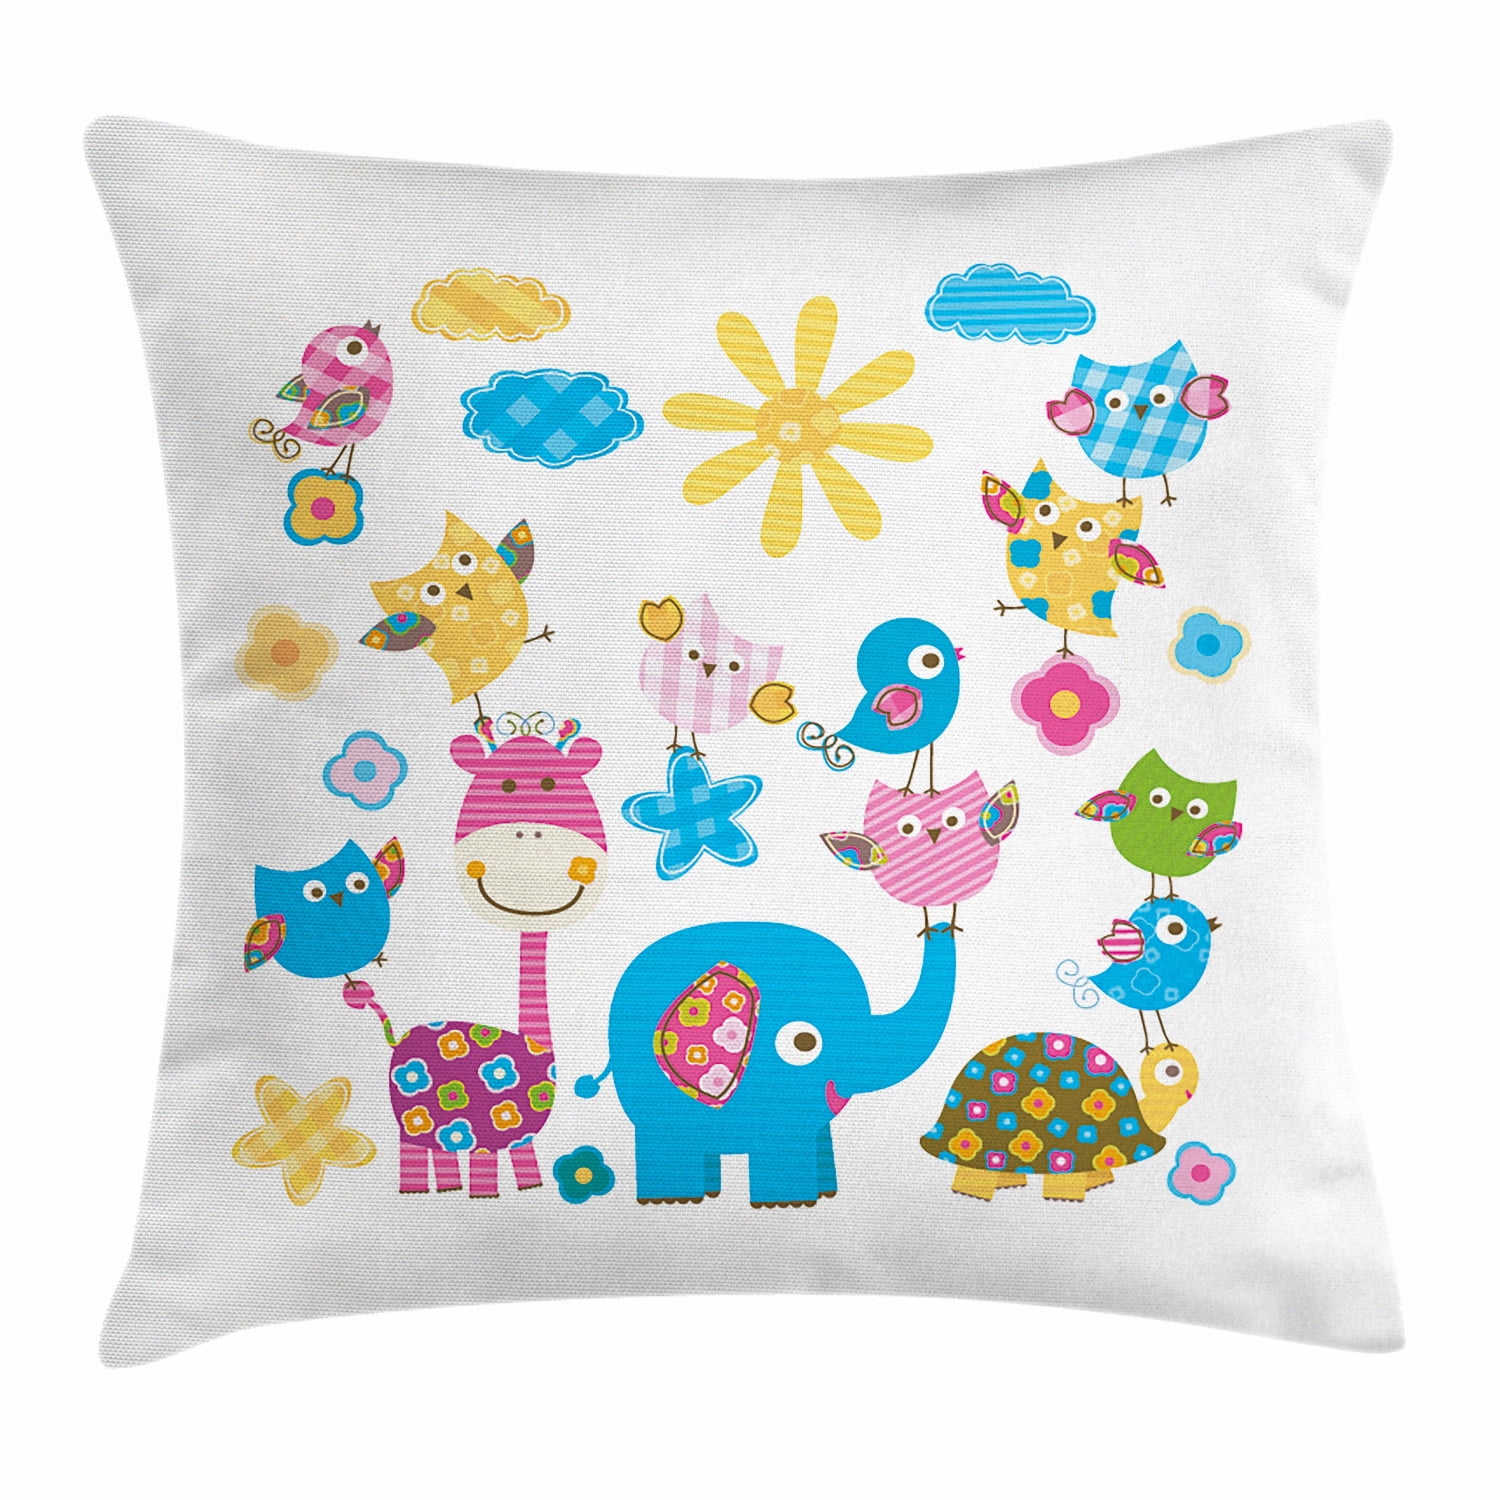 Nursery Throw Pillow Cushion Cover, Cute Animals Cartoon Style Happy  Dancing Animals Elephant Birds Owls, Decorative Square Accent Pillow Case,  16 X 16 Inches, Sky Blue Pink Marigold, by Ambesonne 